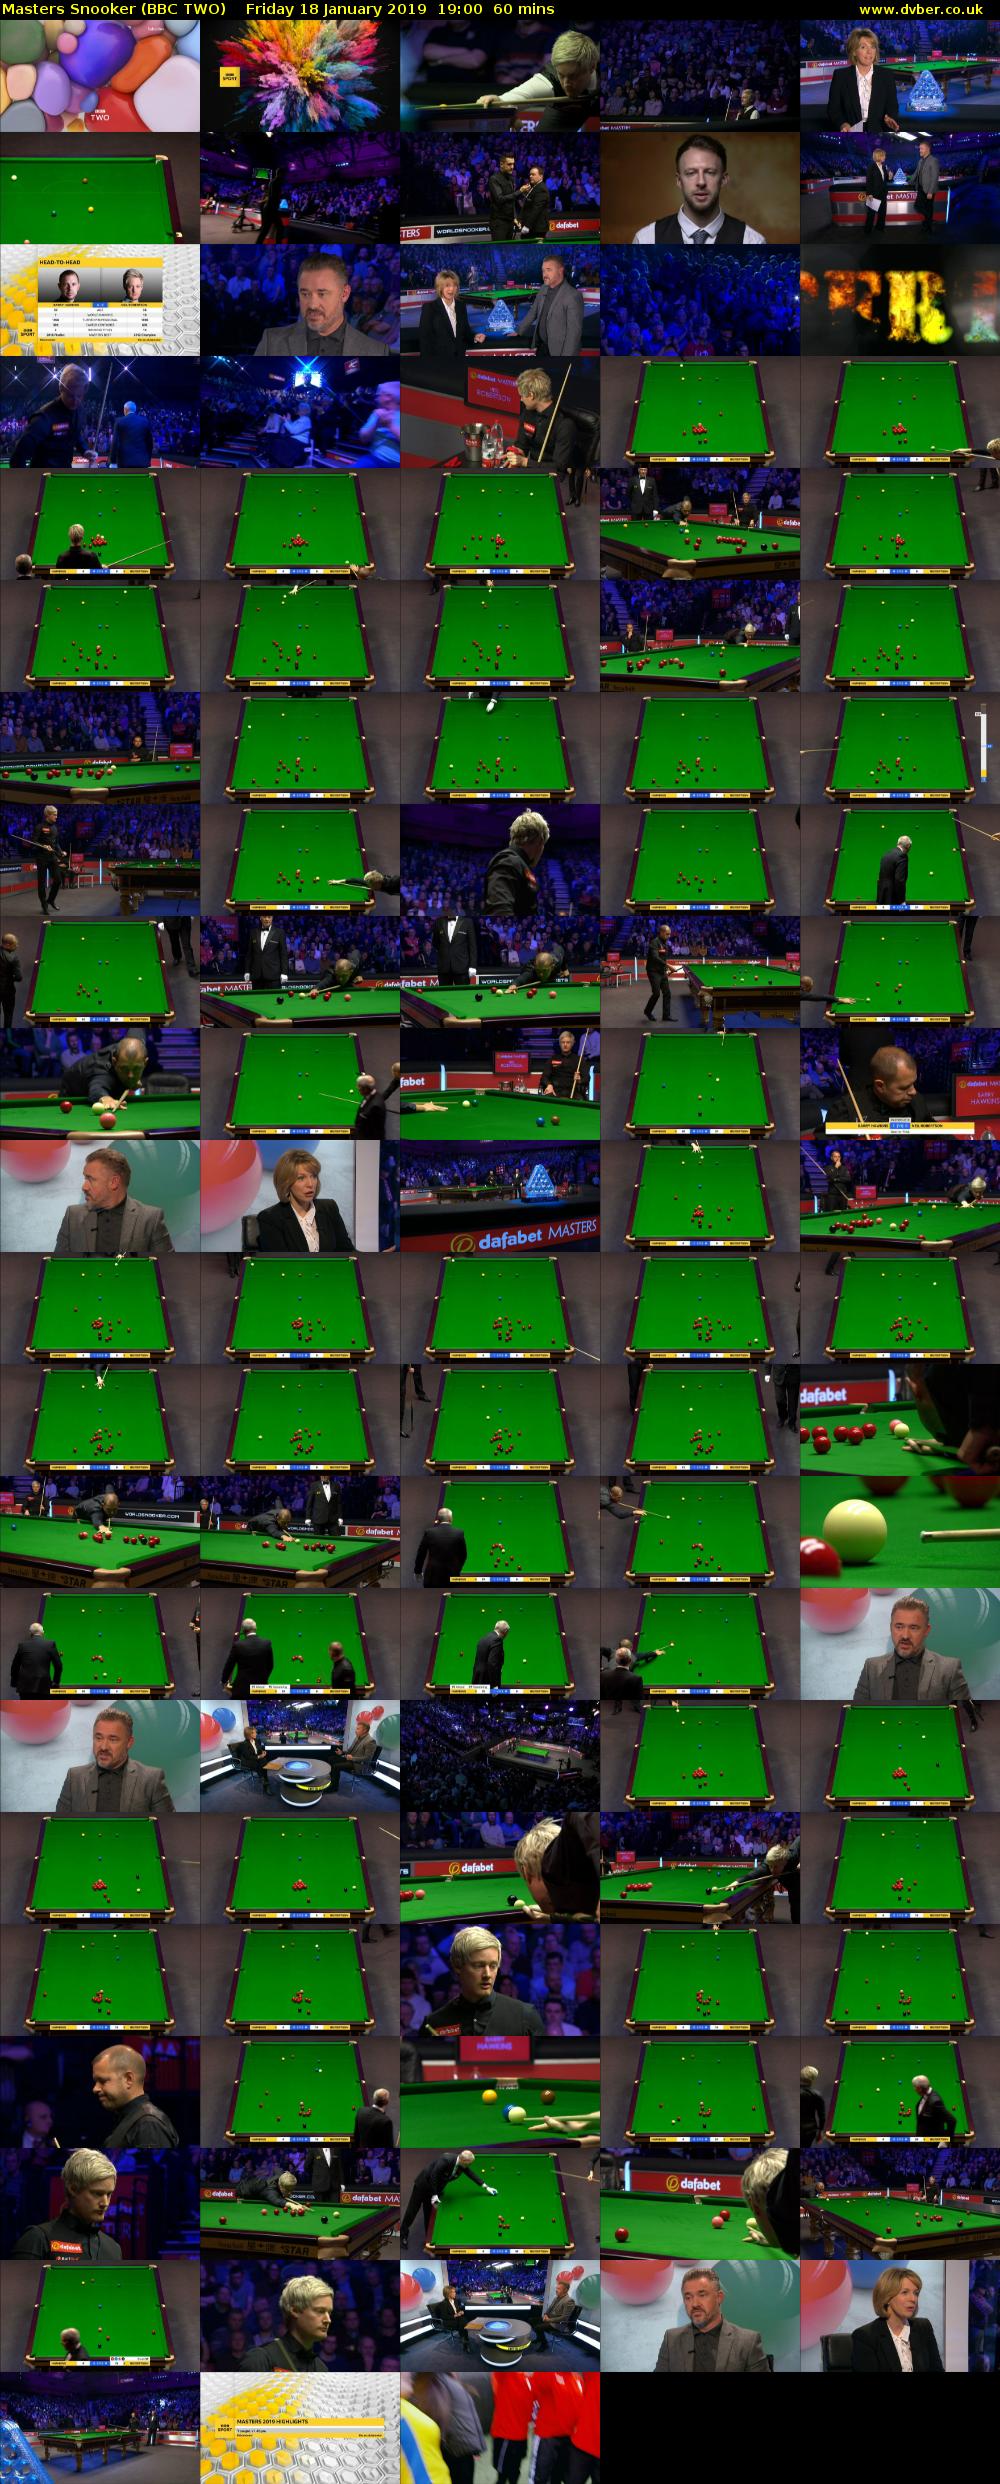 Masters Snooker (BBC TWO) Friday 18 January 2019 19:00 - 20:00